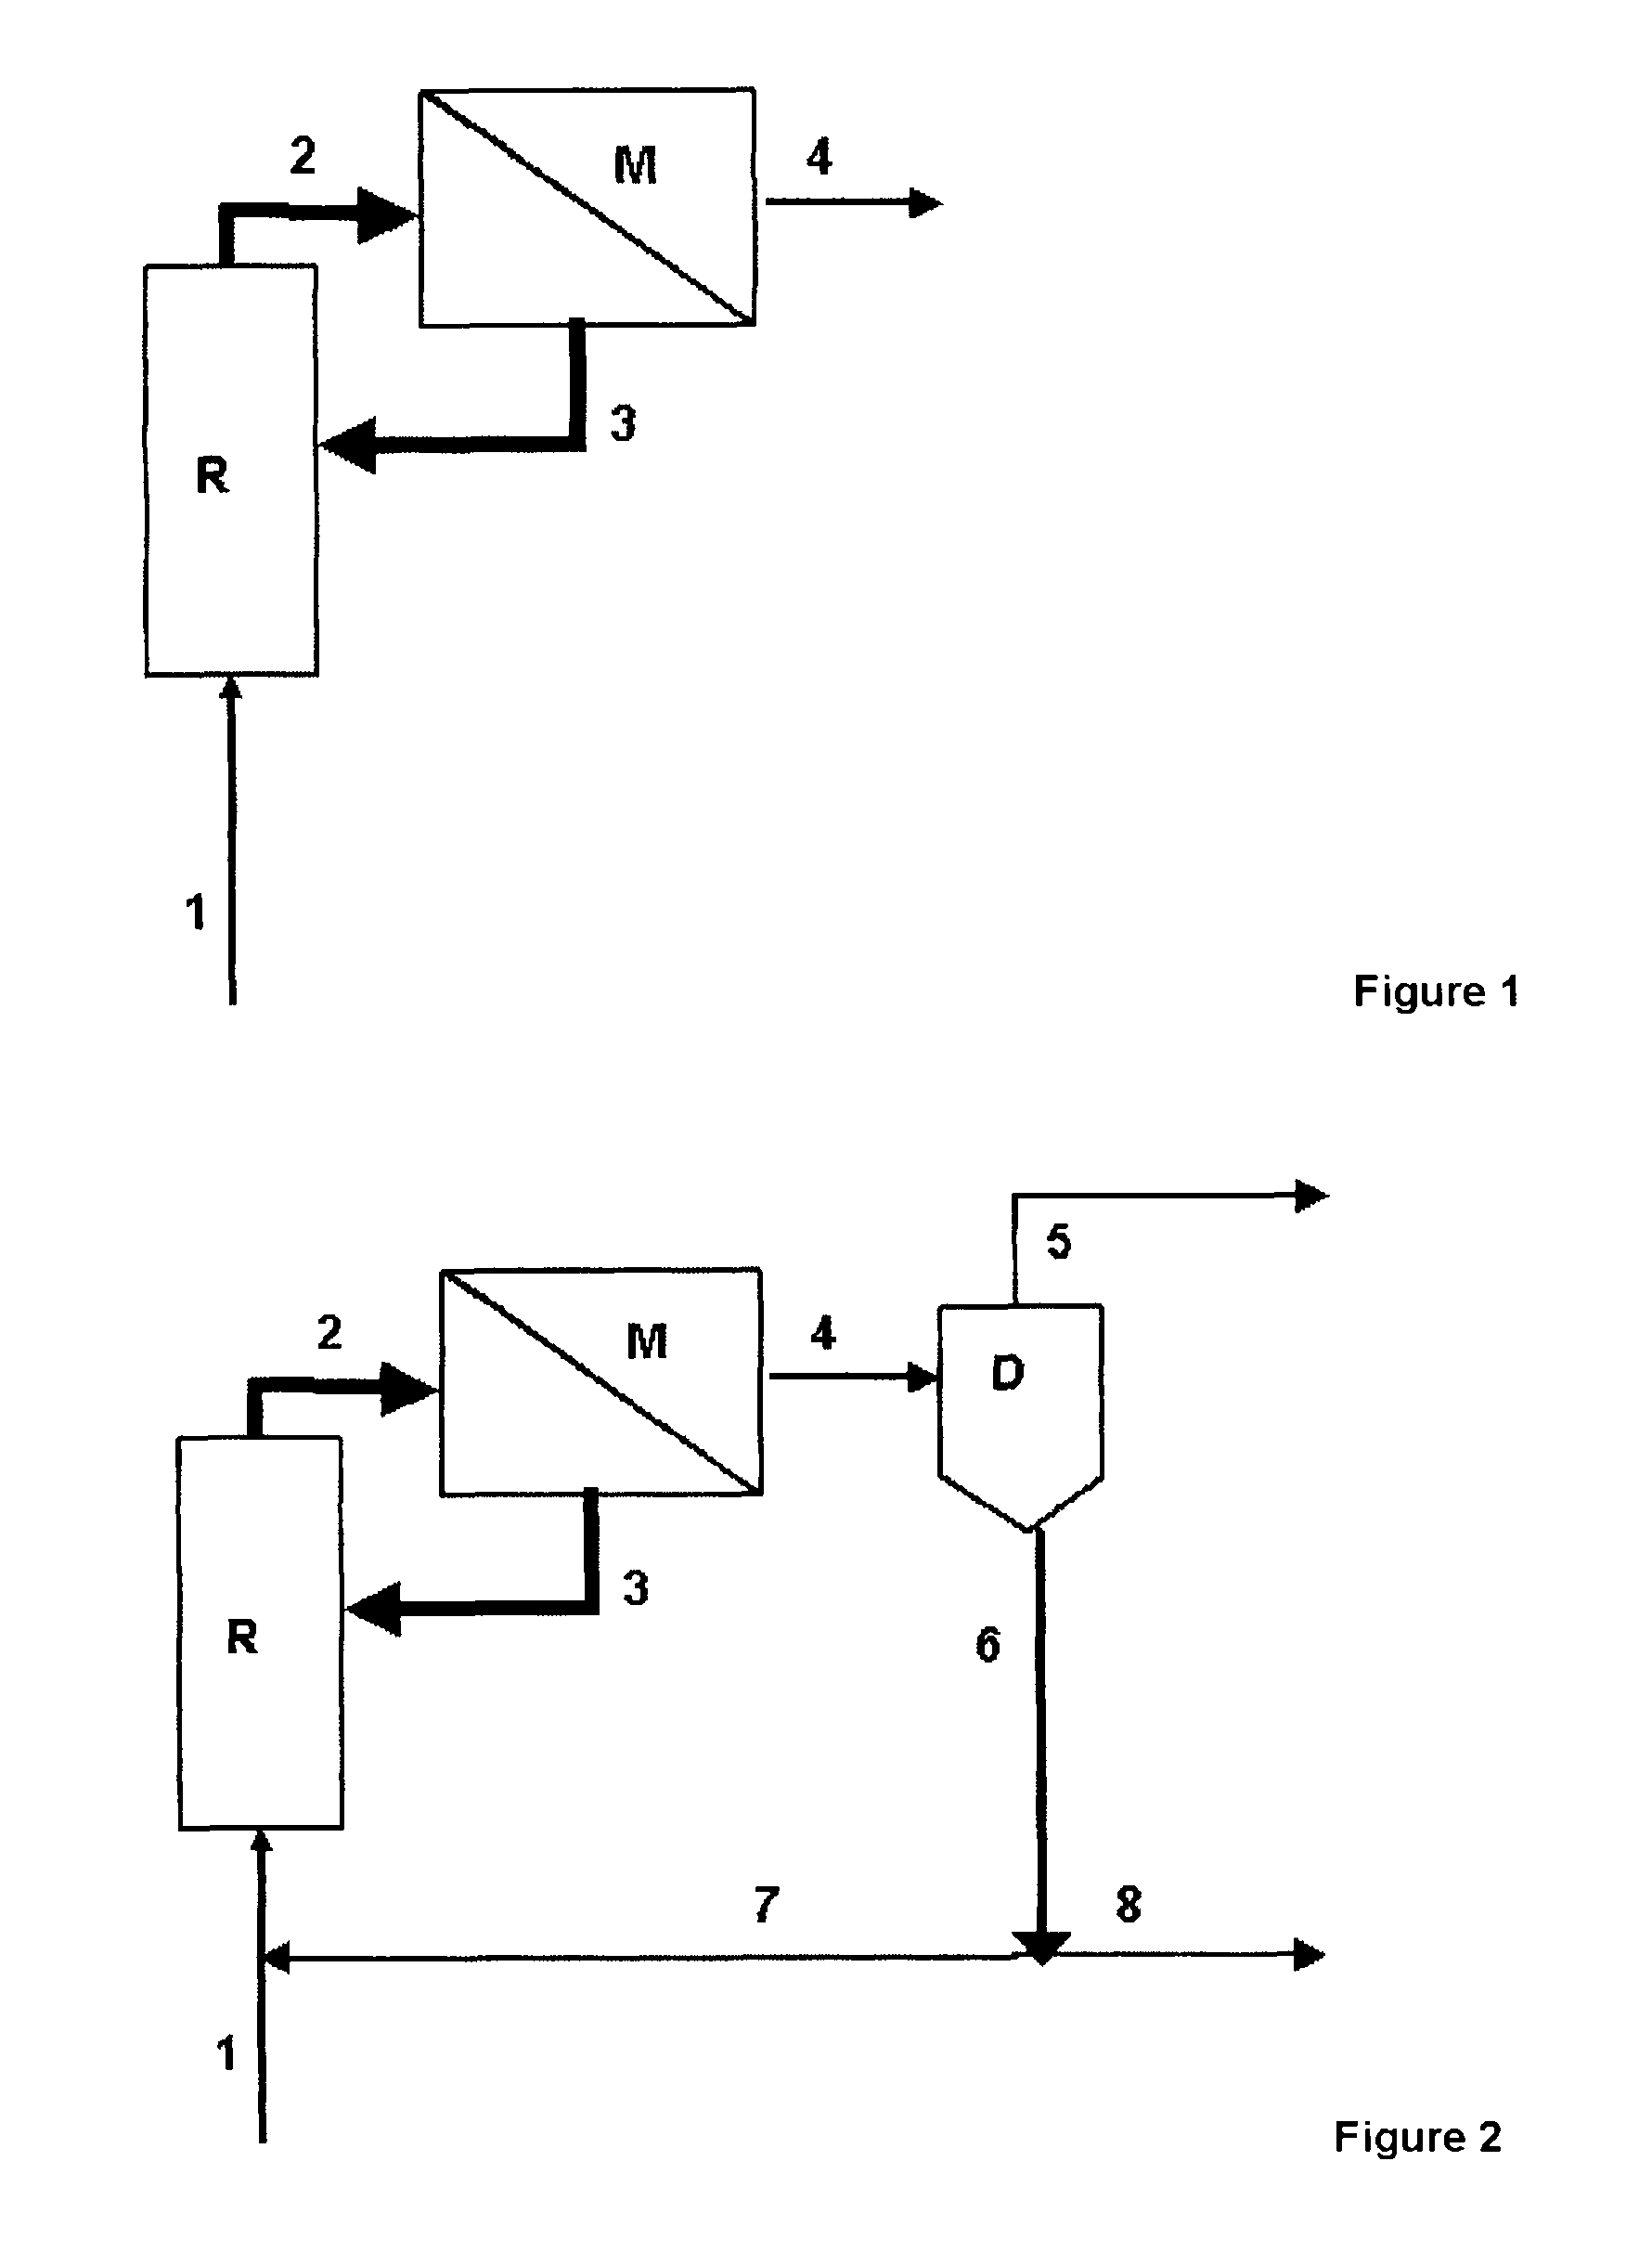 Method for enriching a homogeneous catalyst from a process flow